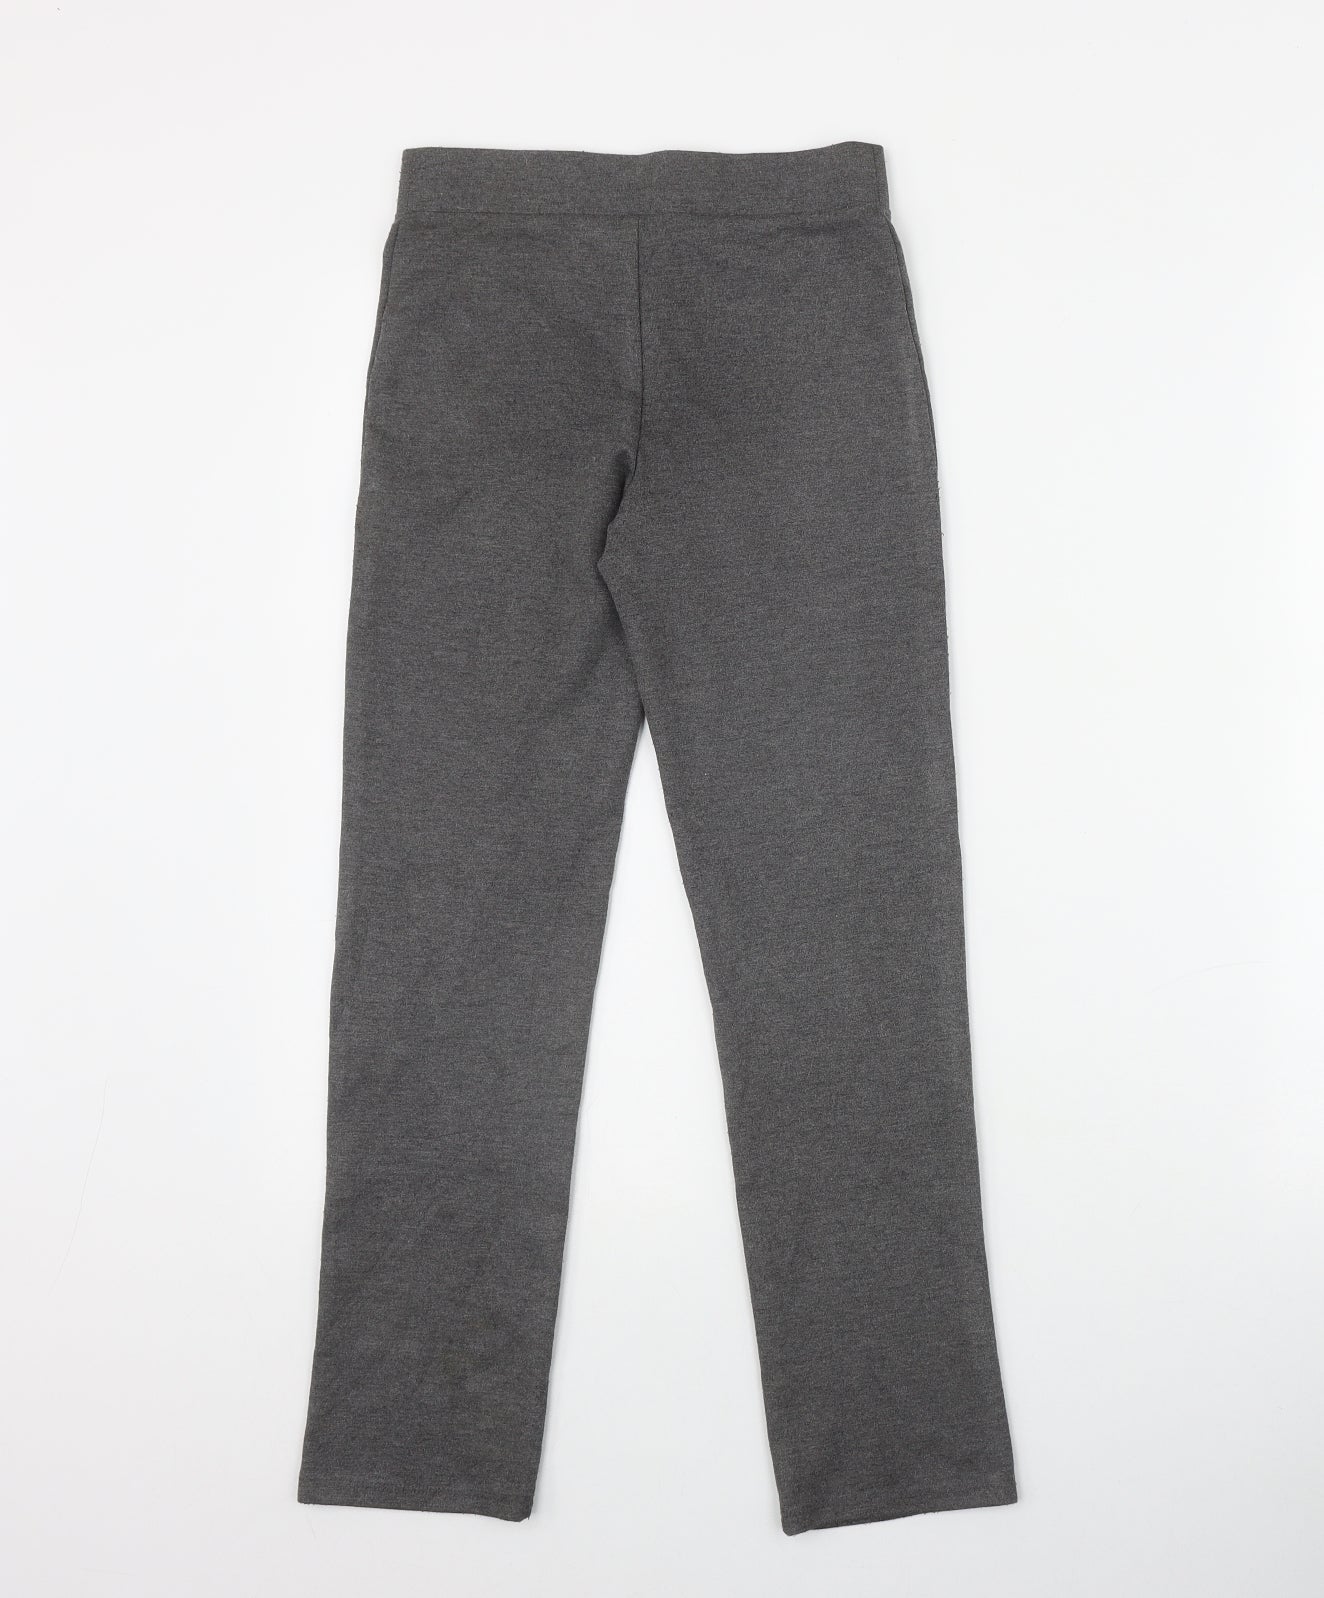 George Girls Grey  Polyester Jegging Trousers Size 9 Years  Regular Pullover